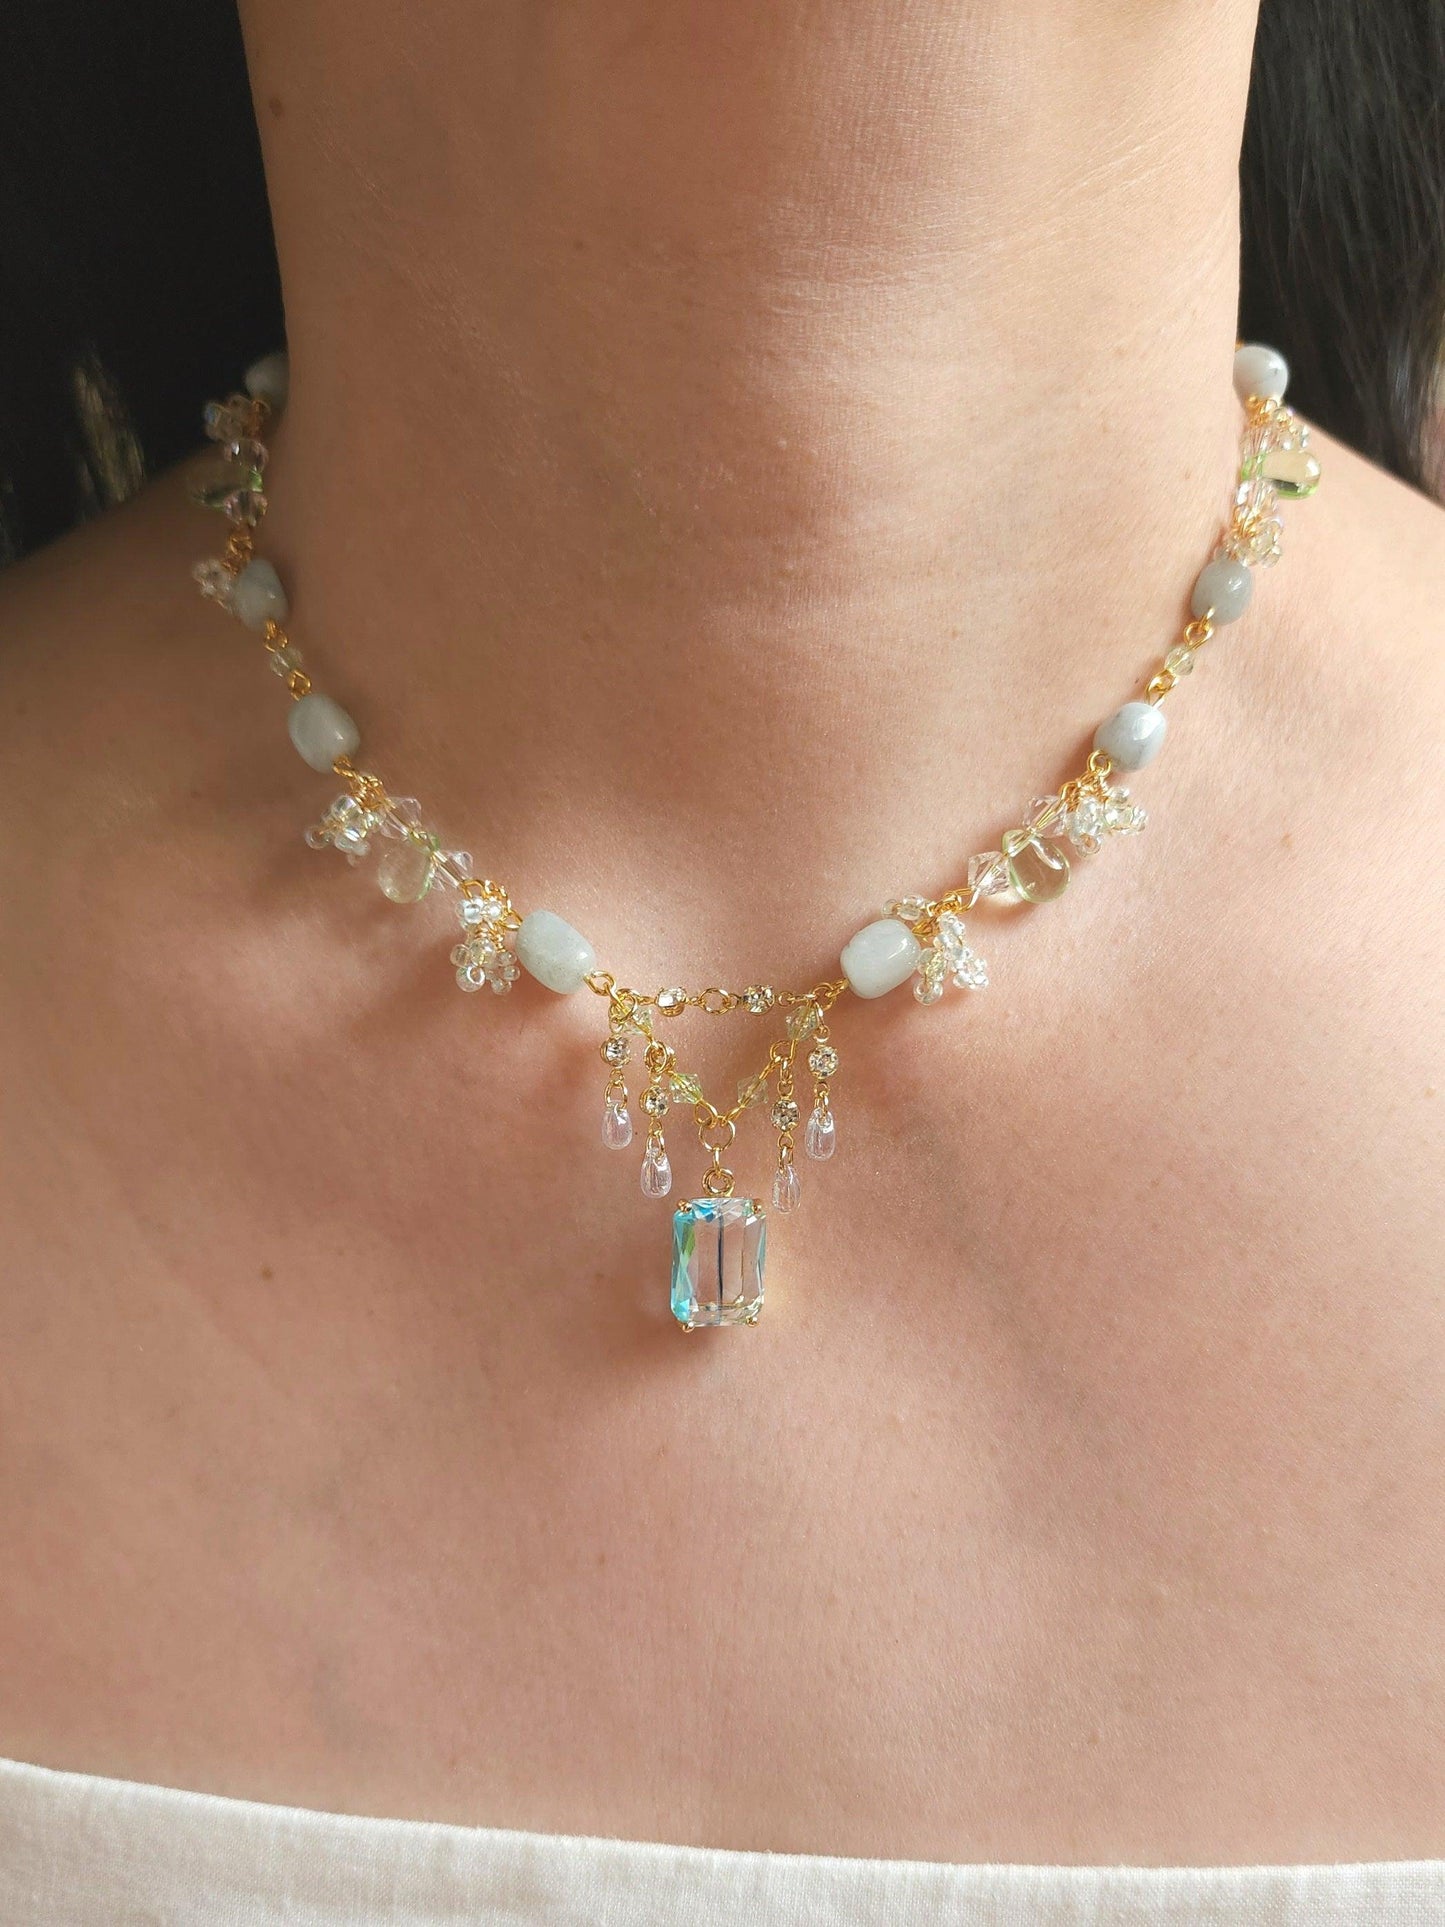 Princess of the Sea Necklace - By Cocoyu